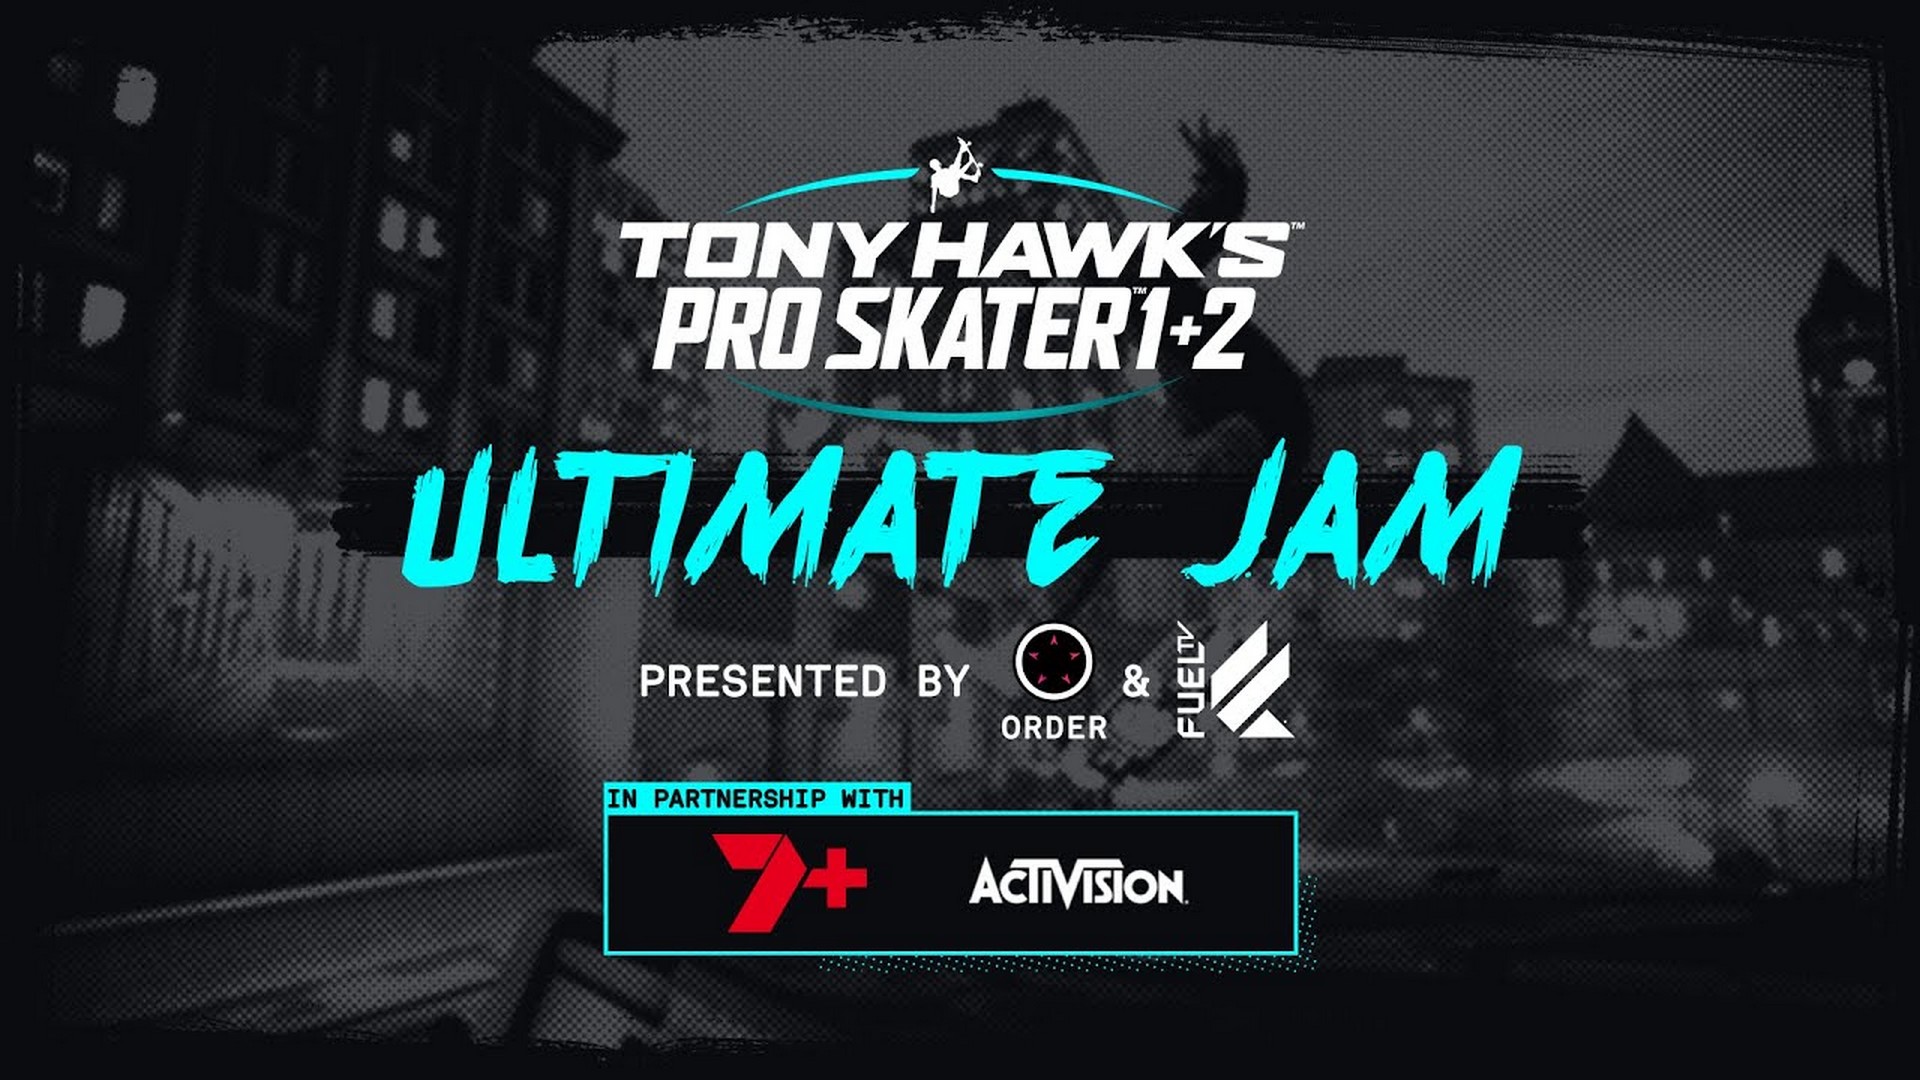 World Records Broken With Tony Hawk’s Pro Skater 1+2 Ultimate Jam Champs